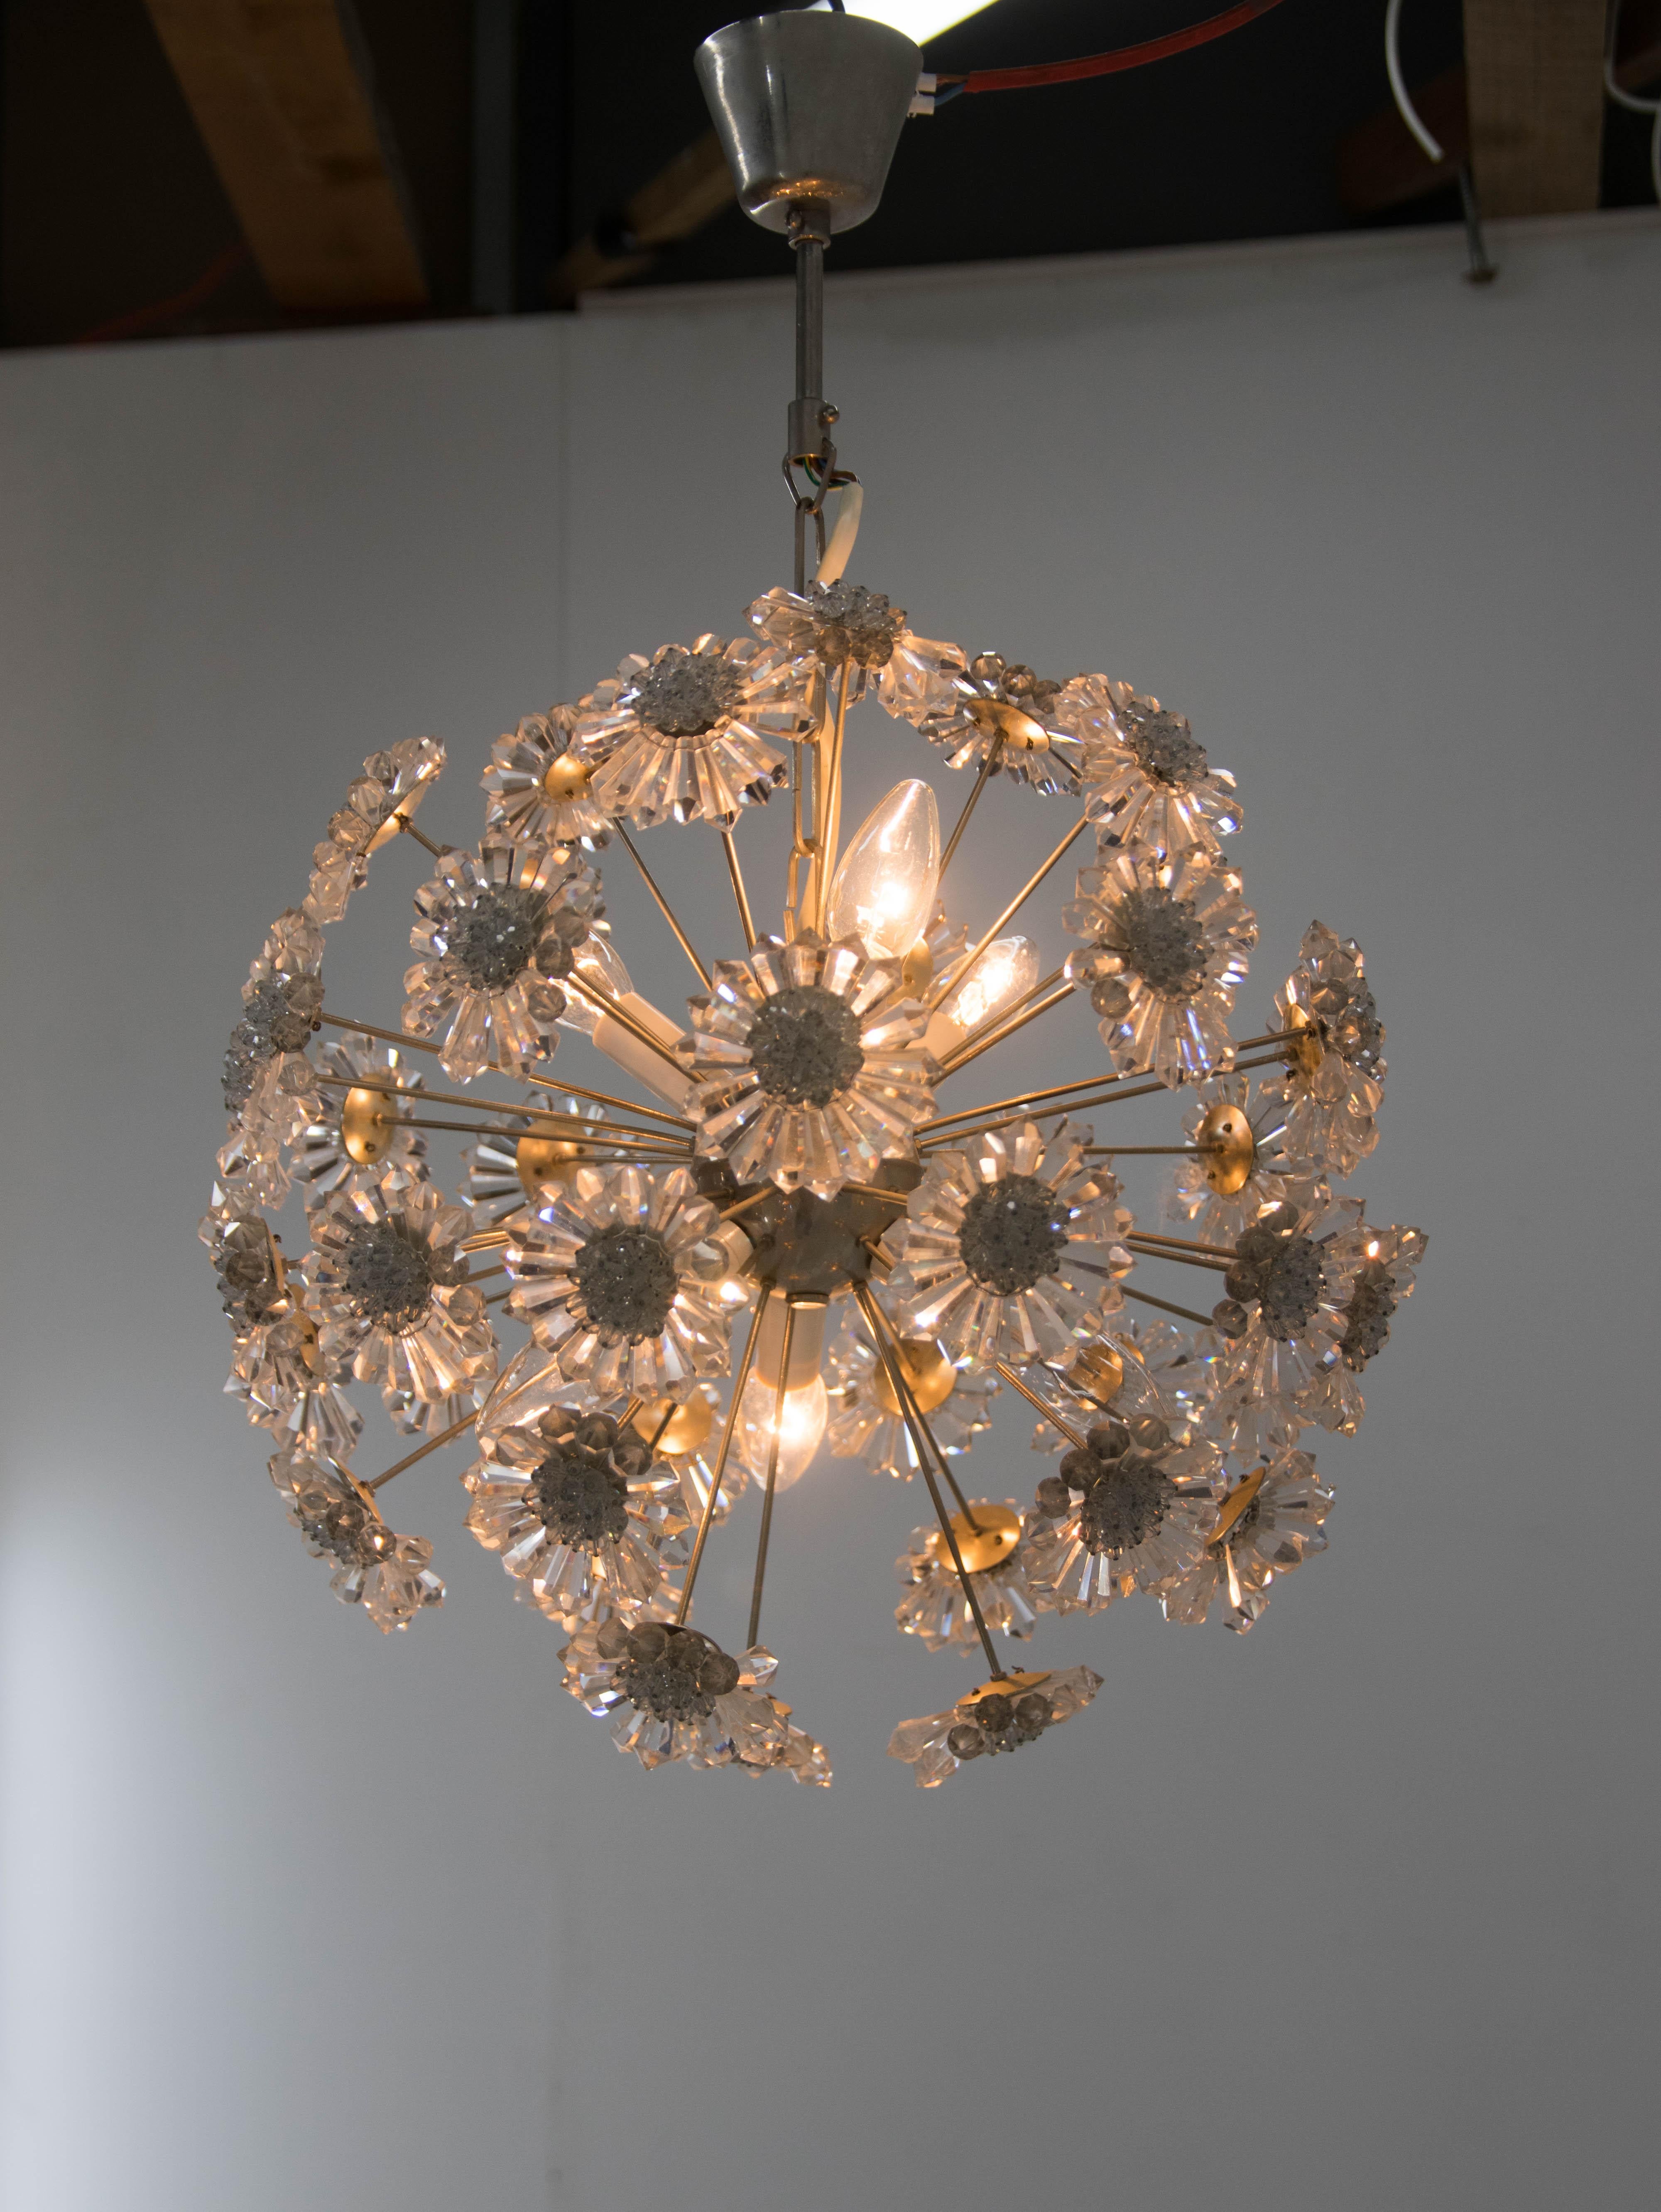 Dandelion chandelier made by Preciosa in 1970. Restored. Very good condition. 
Two separate circuits: 3+3x40W, E12-E14 bulbs.
US wiring compatible.